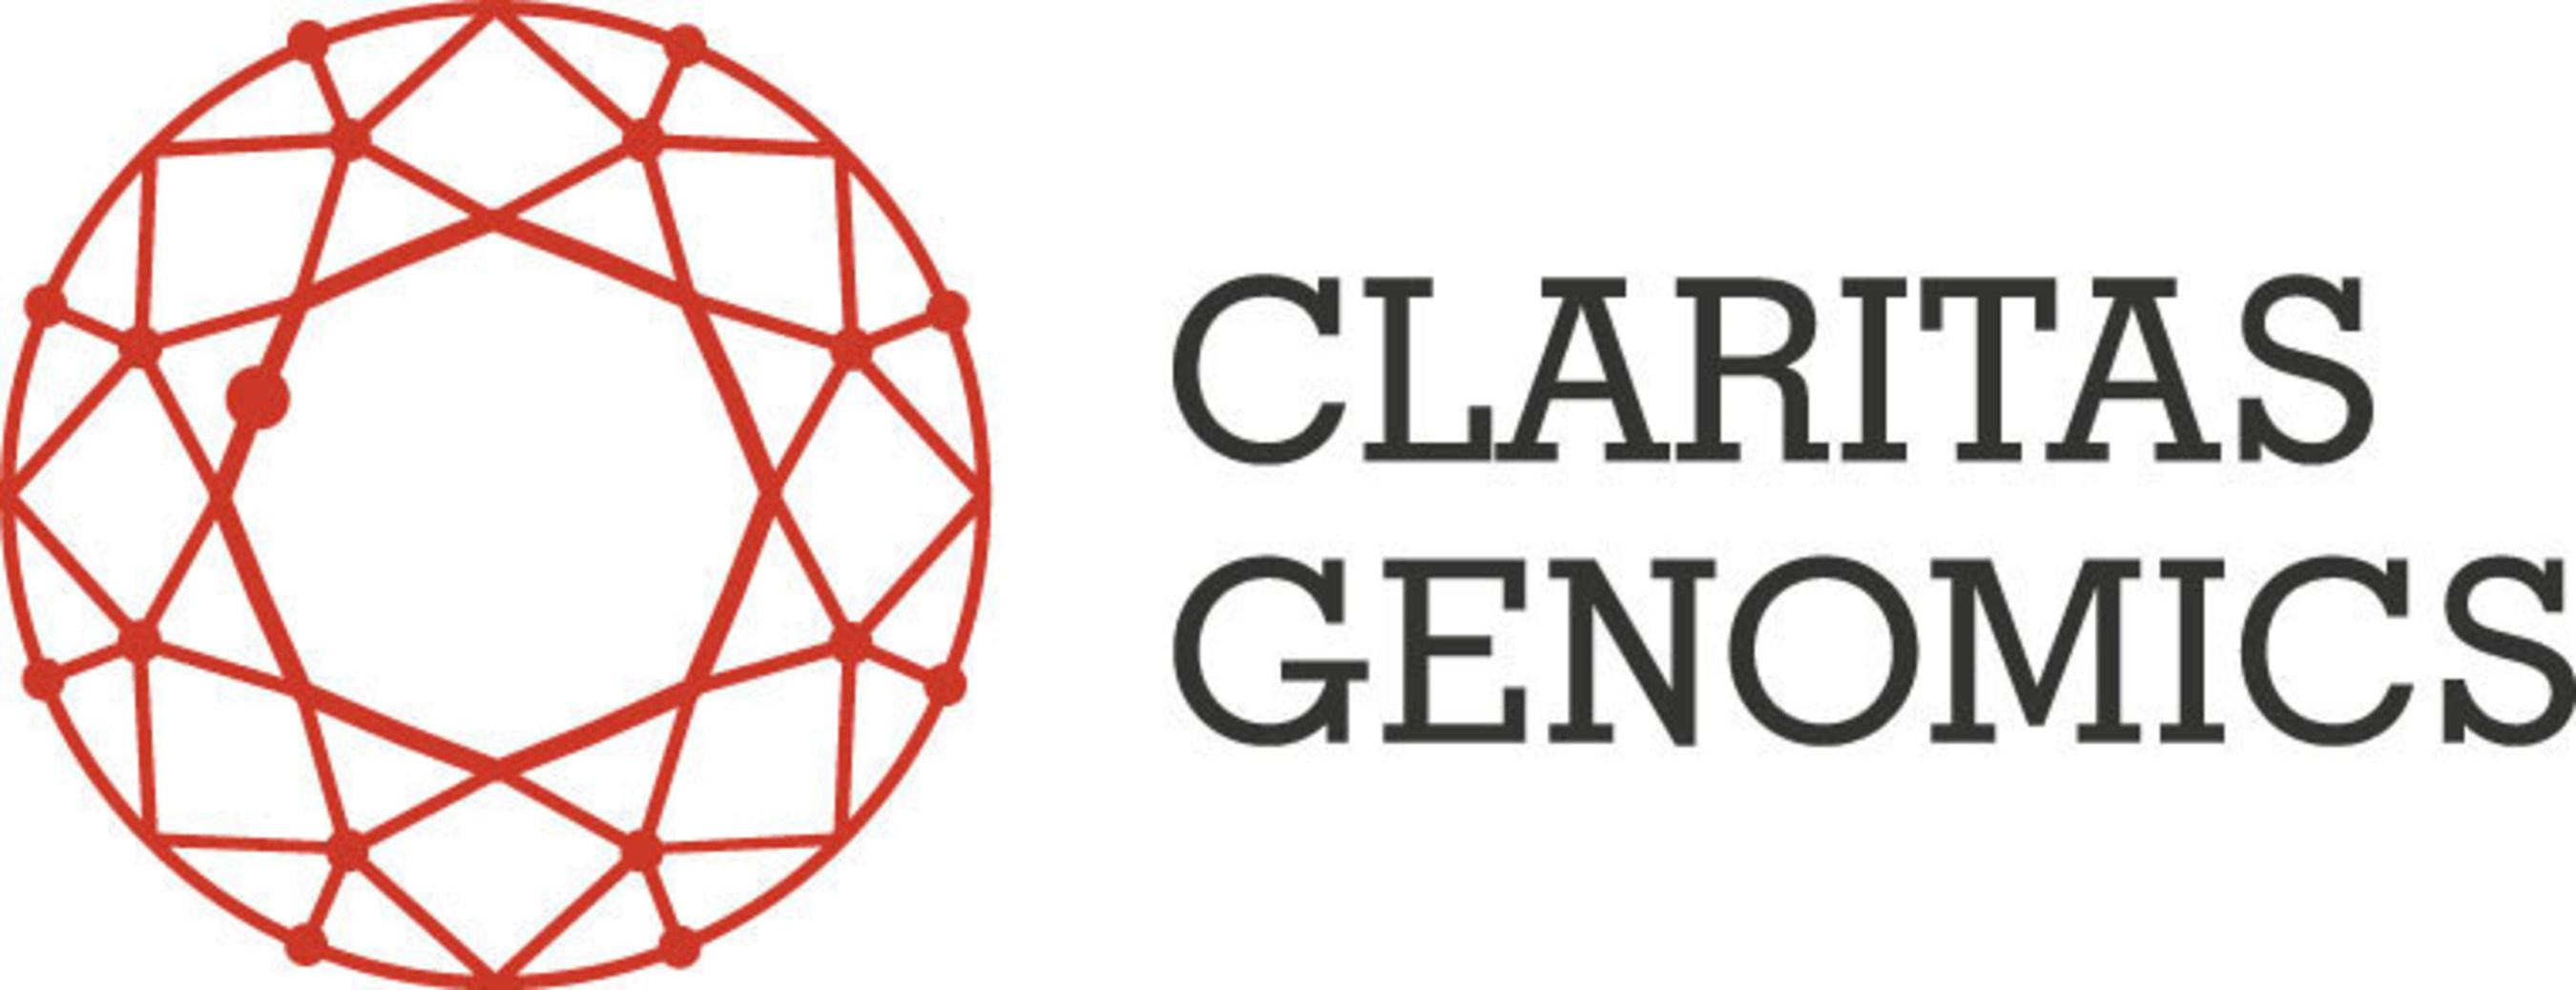 Claritas Genomics is a clinical genetic diagnostic testing company that combines the clinical expertise of the world's best pediatric specialists with next-generation sequencing technology to inform and improve patient care